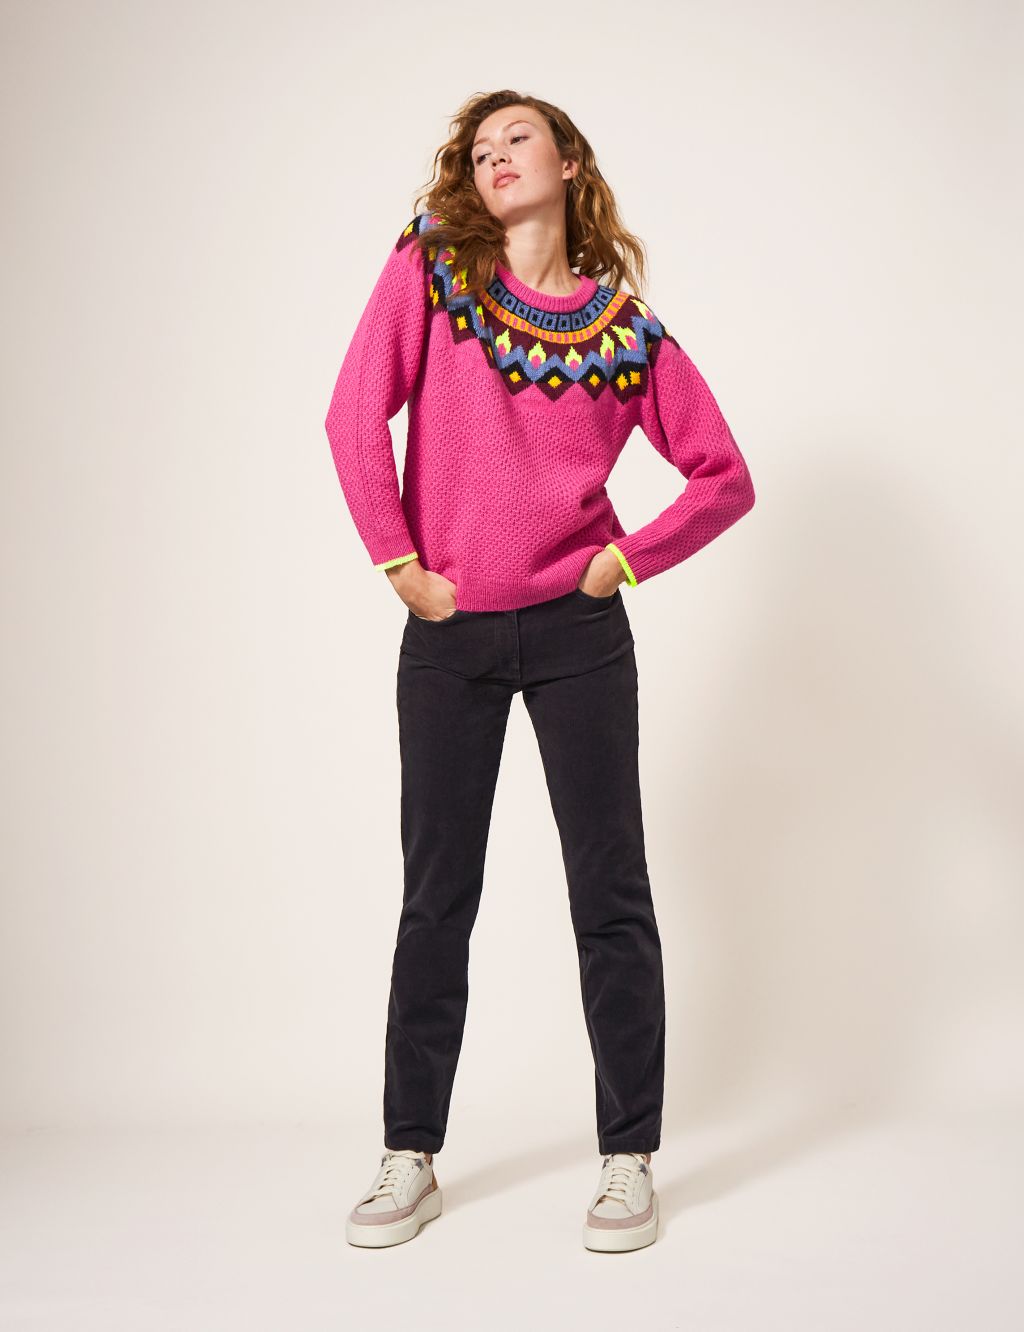 Patterned Crew Neck Jumper with Wool image 1